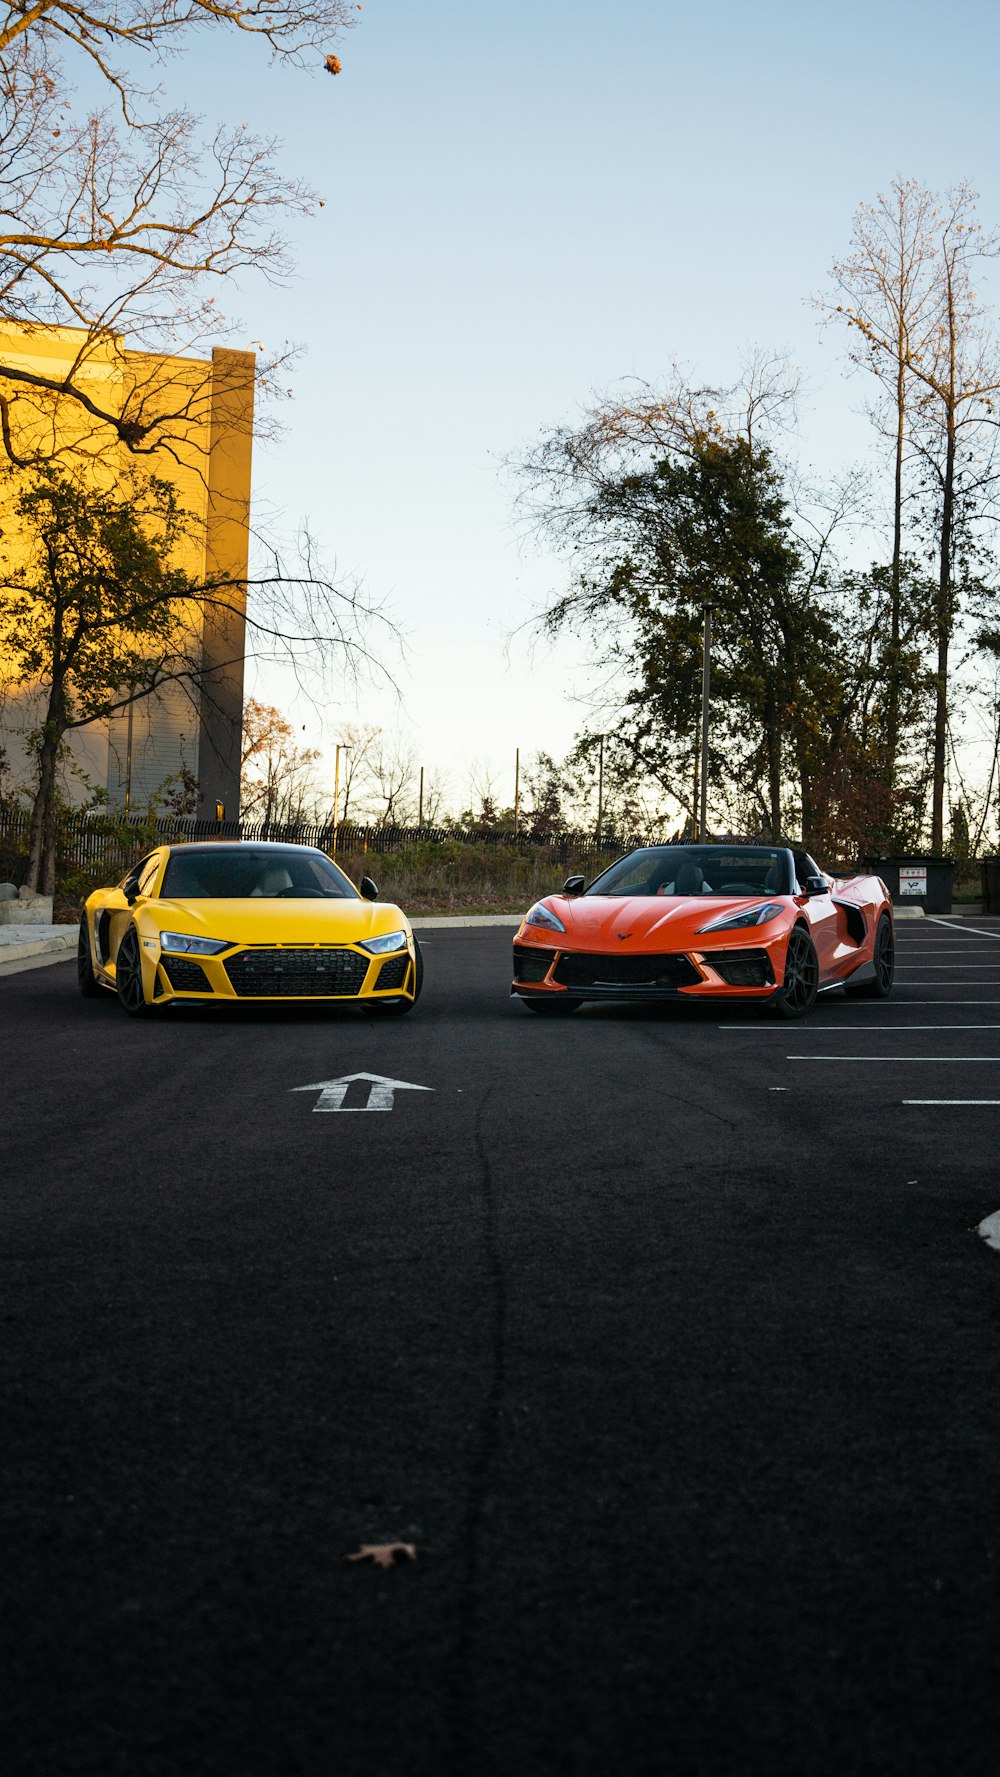 two orange and yellow sports cars parked in a parking lot